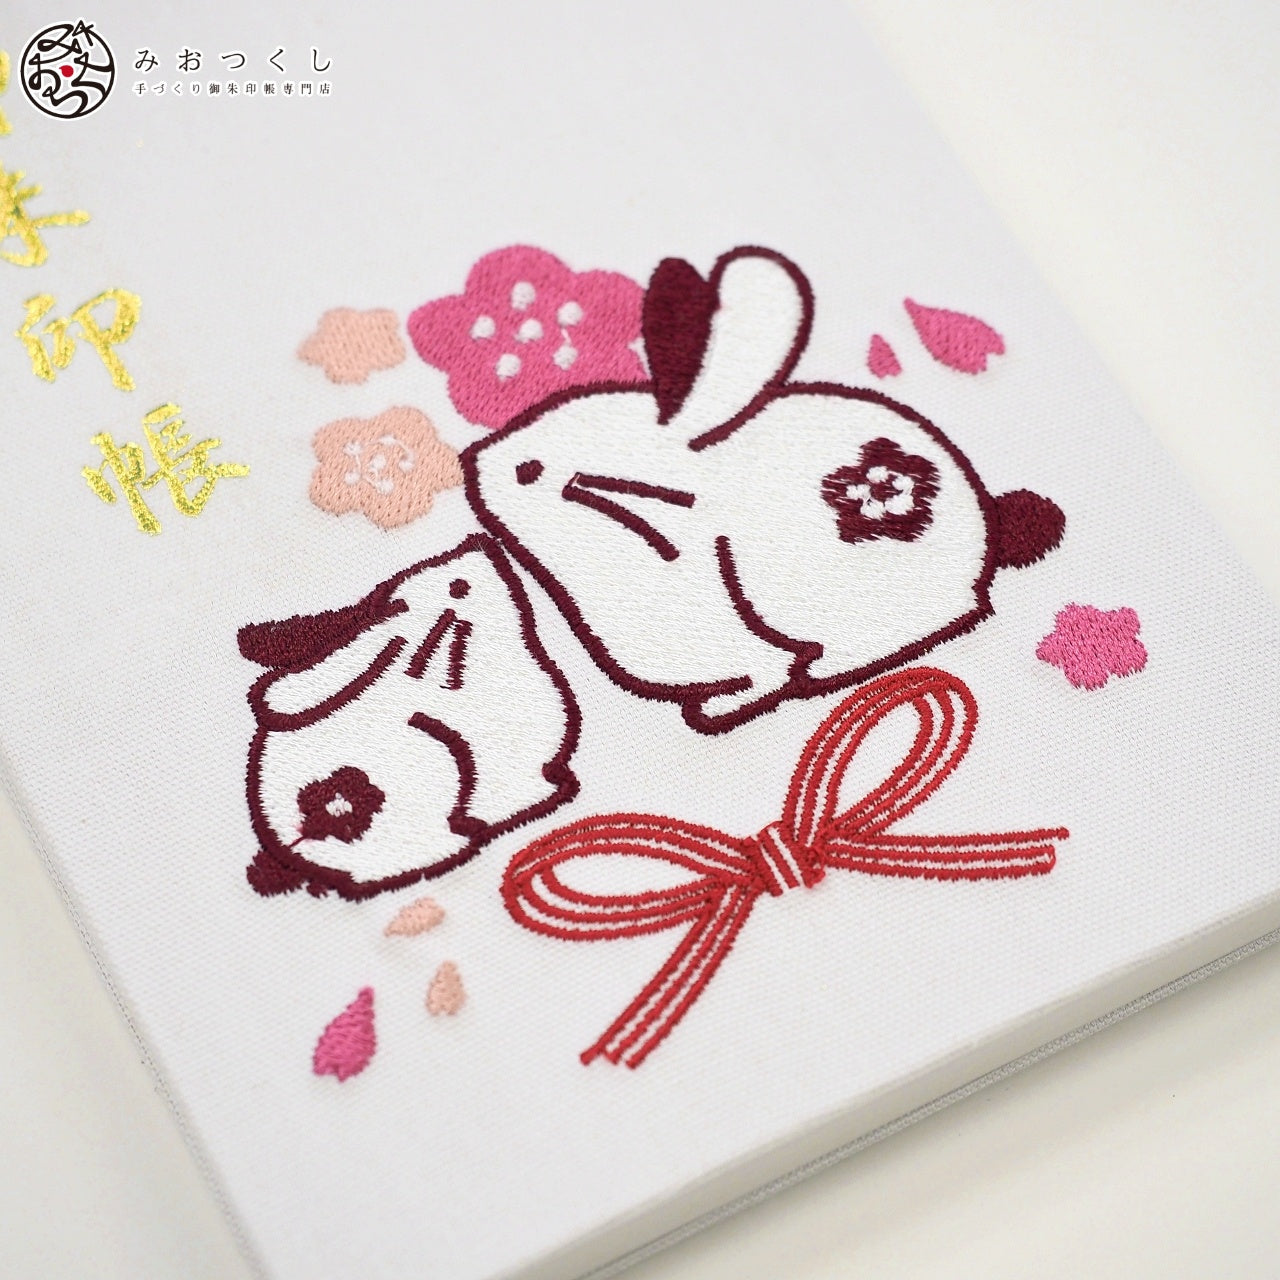 Goshuin book "Limited quantity" embroidery goshuin book/Rabbit (white)